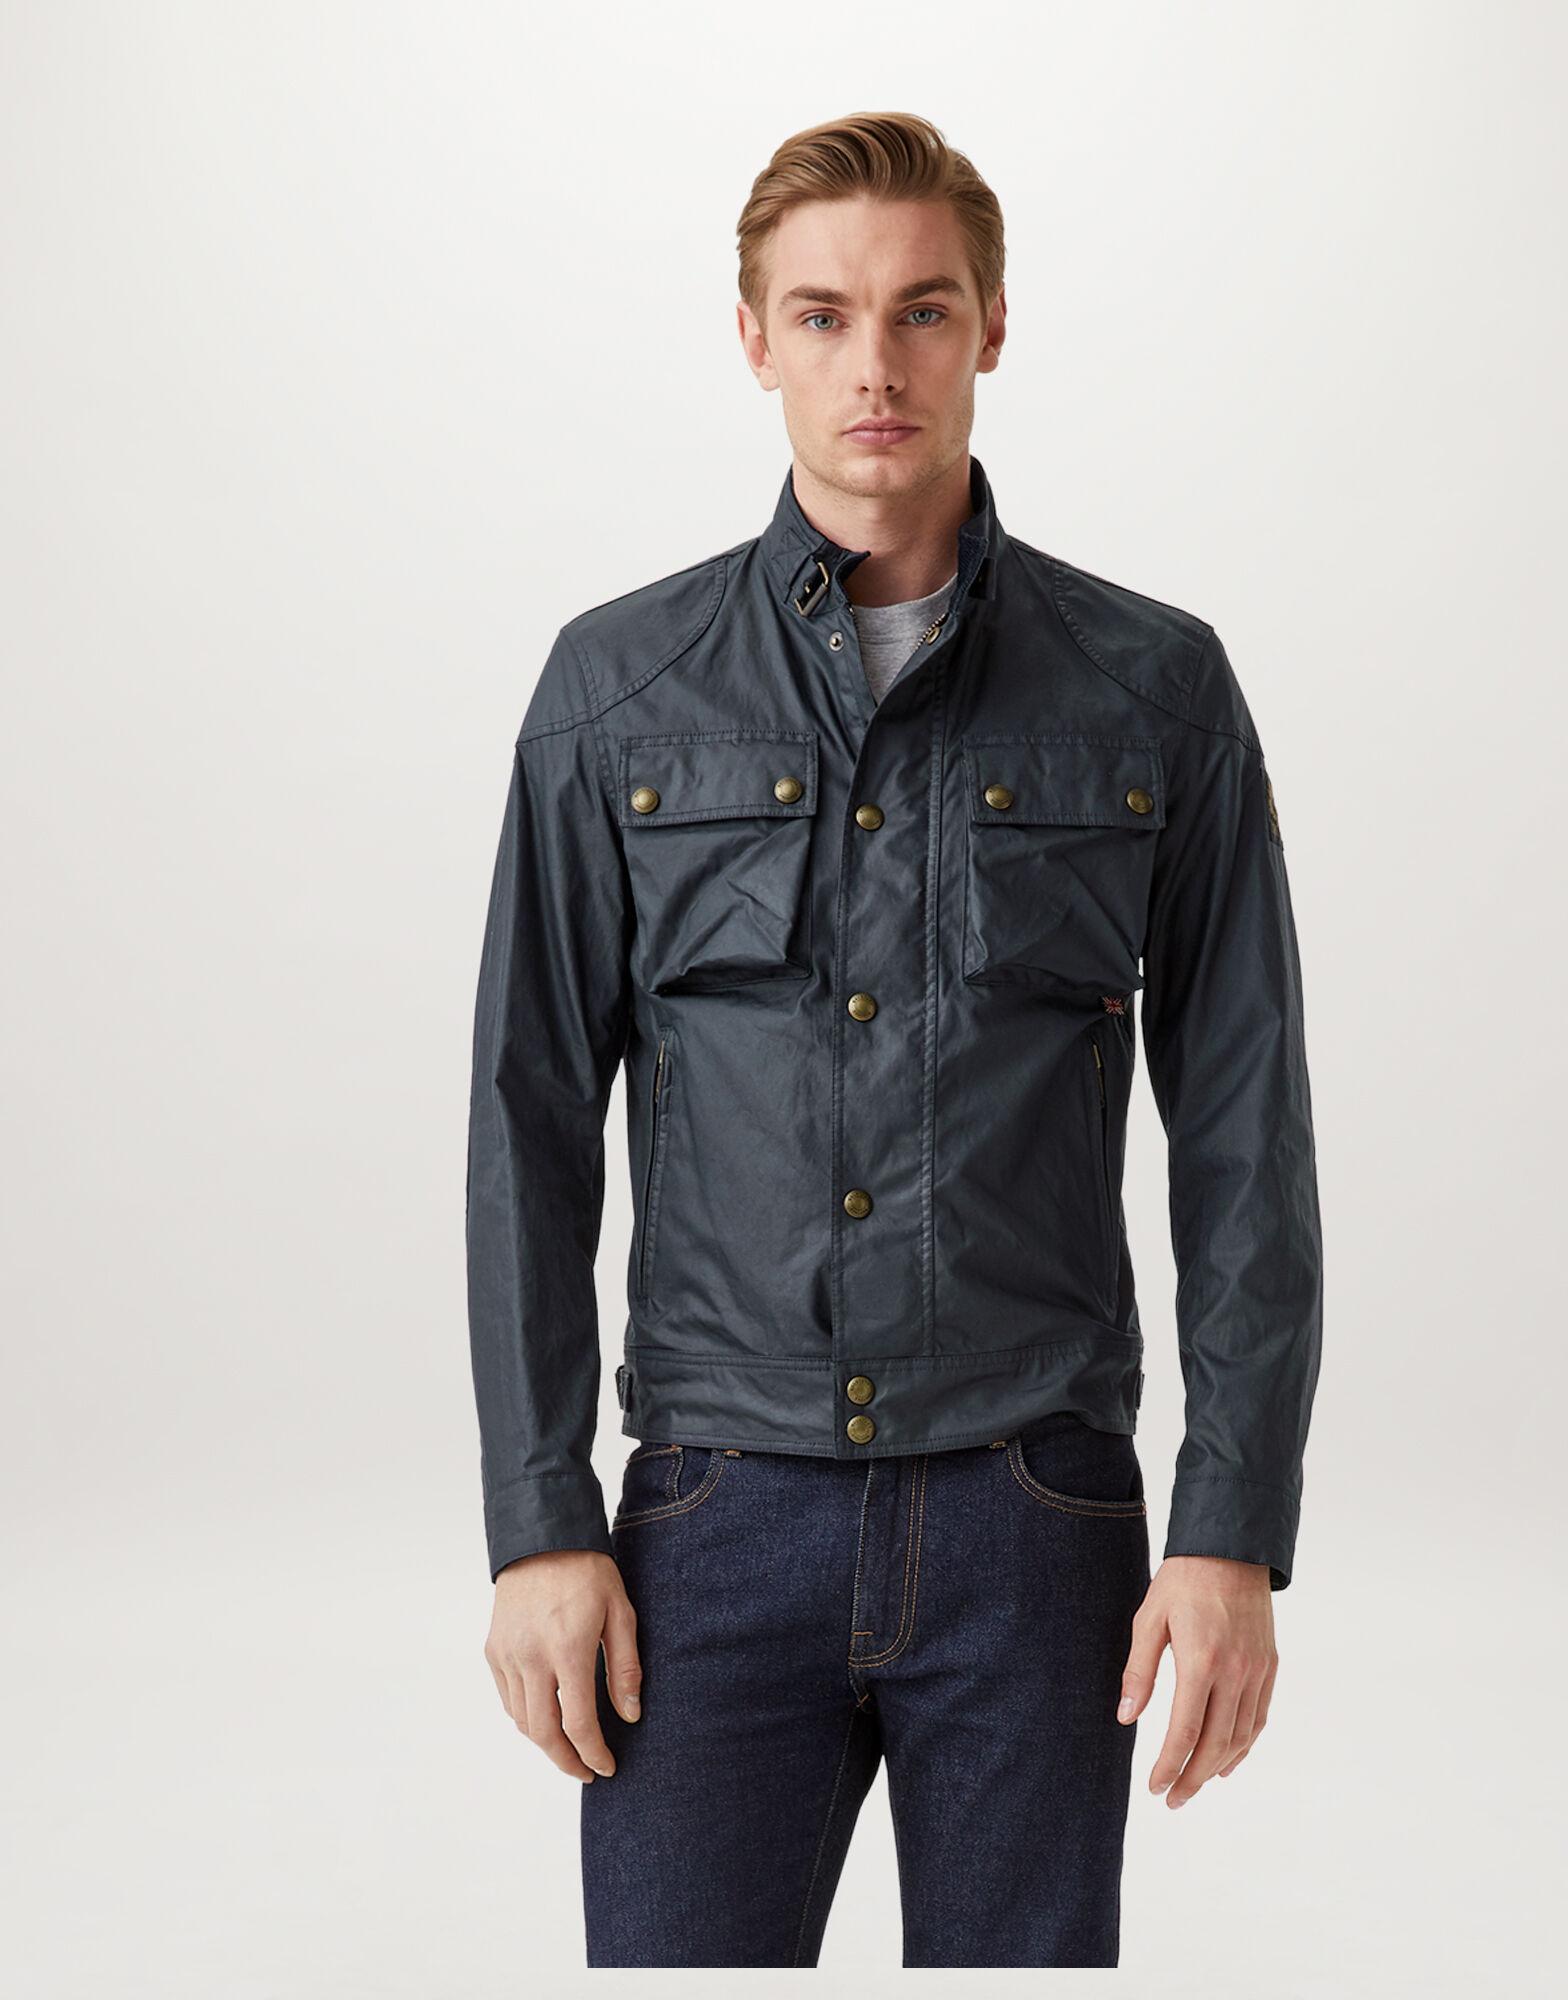 Belstaff Racemaster Waxed Cotton Jacket in Navy (Blue) for Men - Save 54% |  Lyst